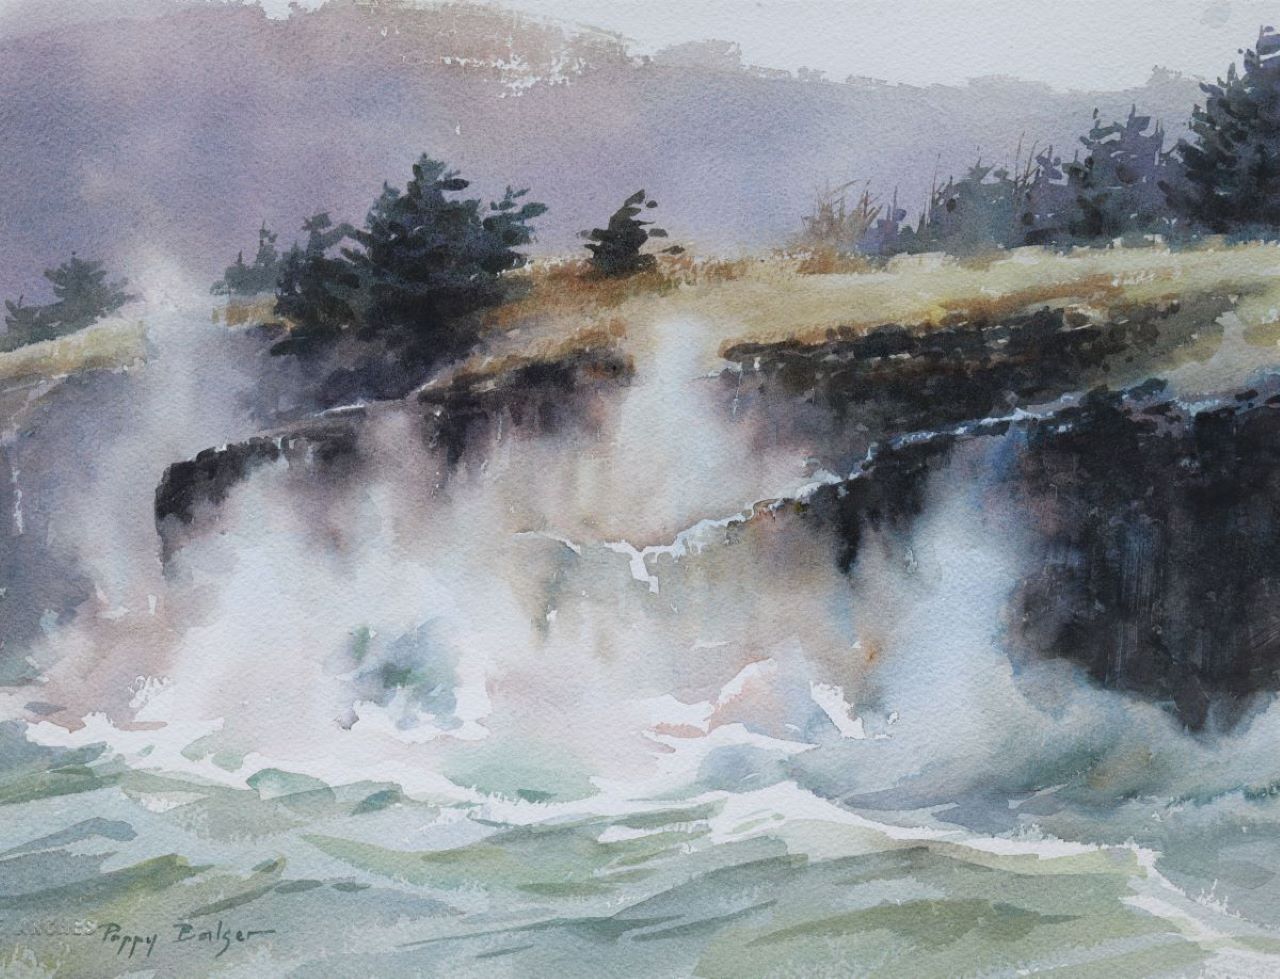 A painting of waves washing over the cliffs at Point Prim, Nova Scotia during a November gale when a mass of water that was a wave is thrown up into the air with great force. The painting shows the sheets and layers of spray falling back upon the rocks and the sea.